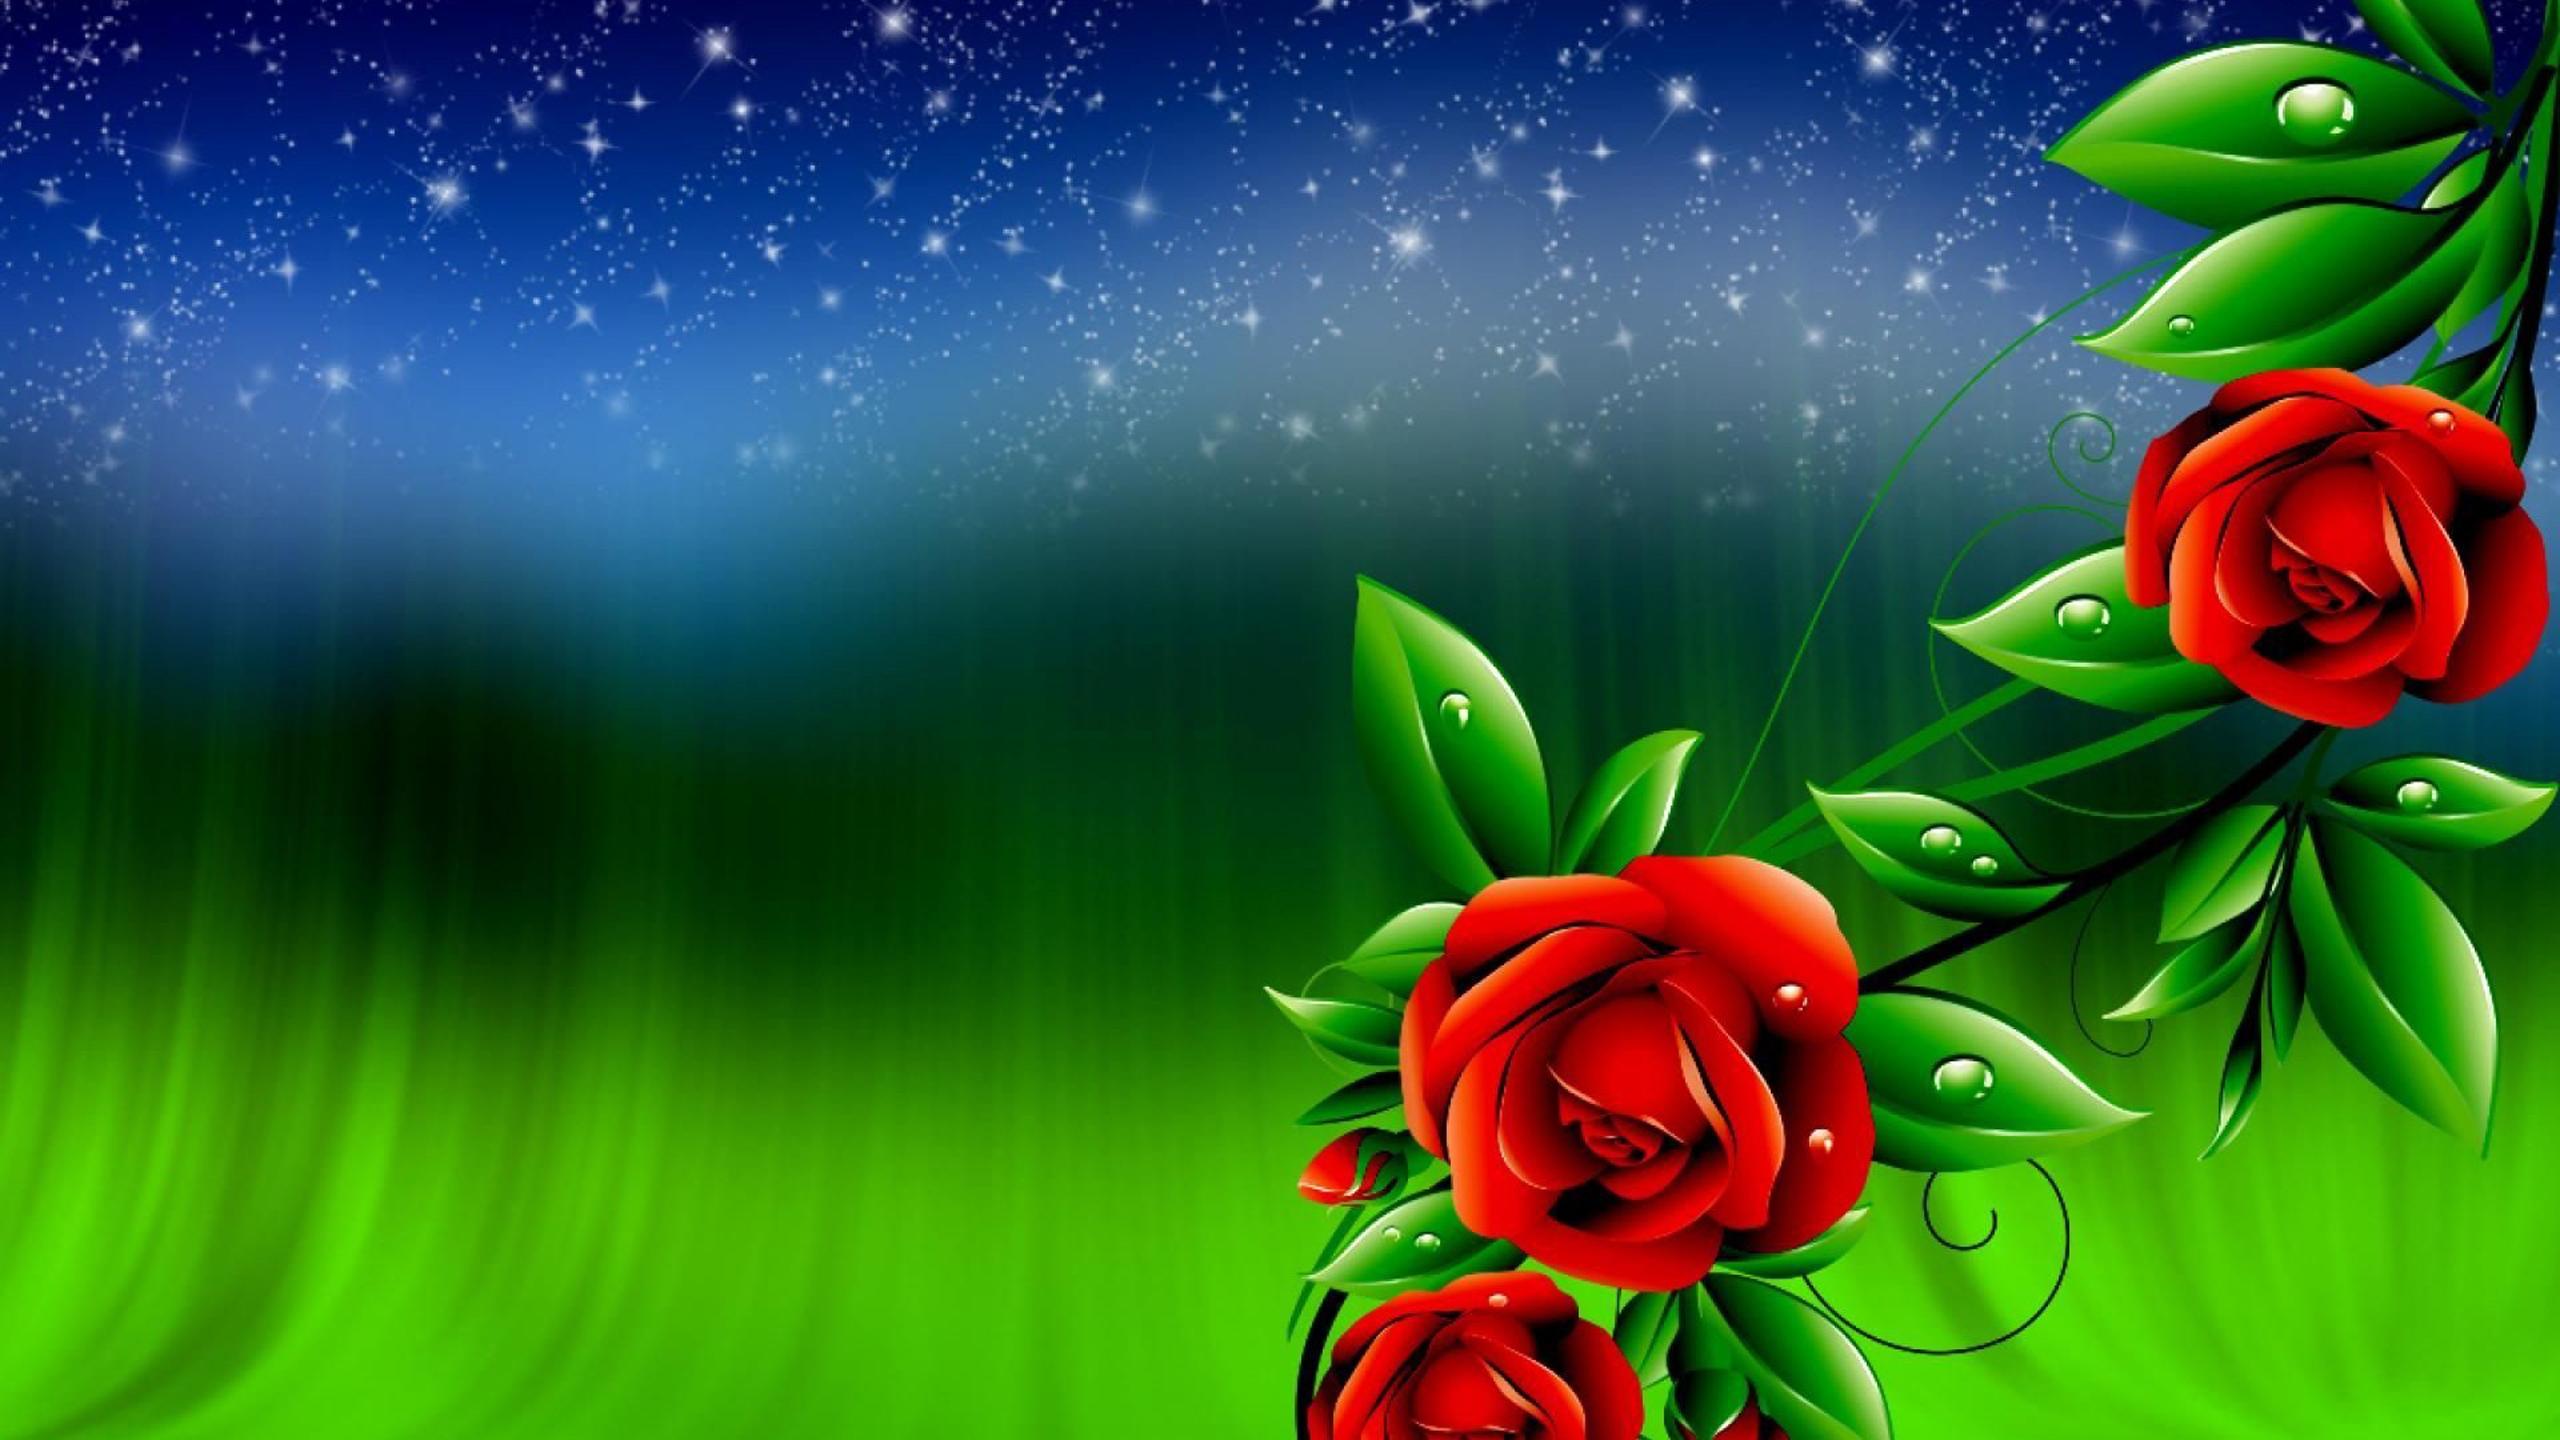 2560 x 1440 · jpeg - Red Roses And Green Leaves With Drops Of Water Sky With Stars ...